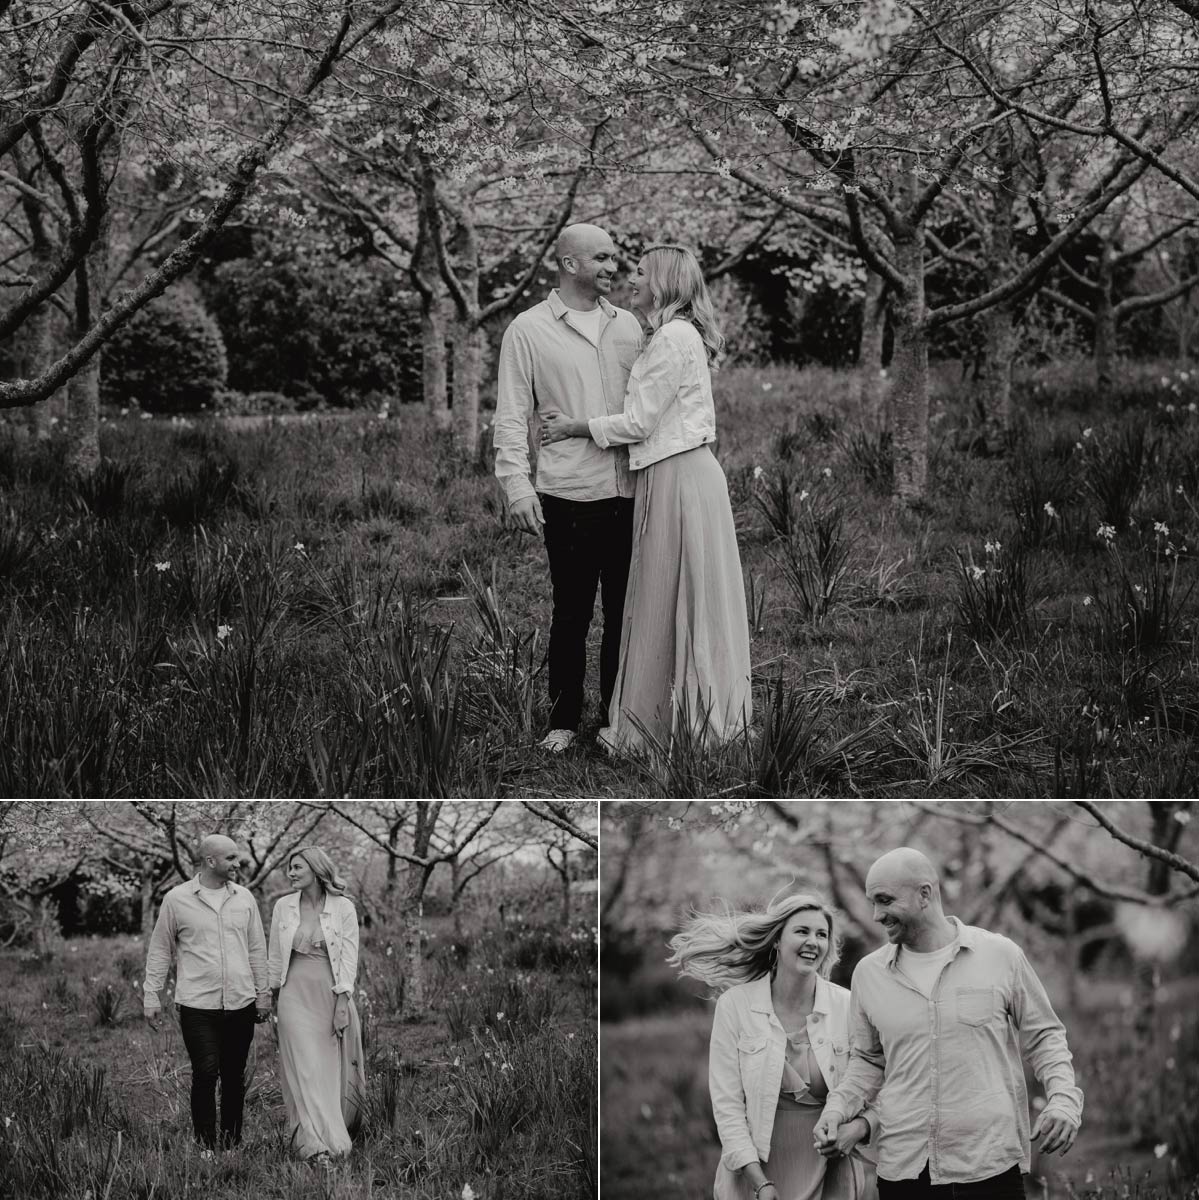 couple engagement lifestyle portrait in spring cherry blossoms, auckland botanic gardens during a family portrait photo session with sarah weber photography spring family photos auckland